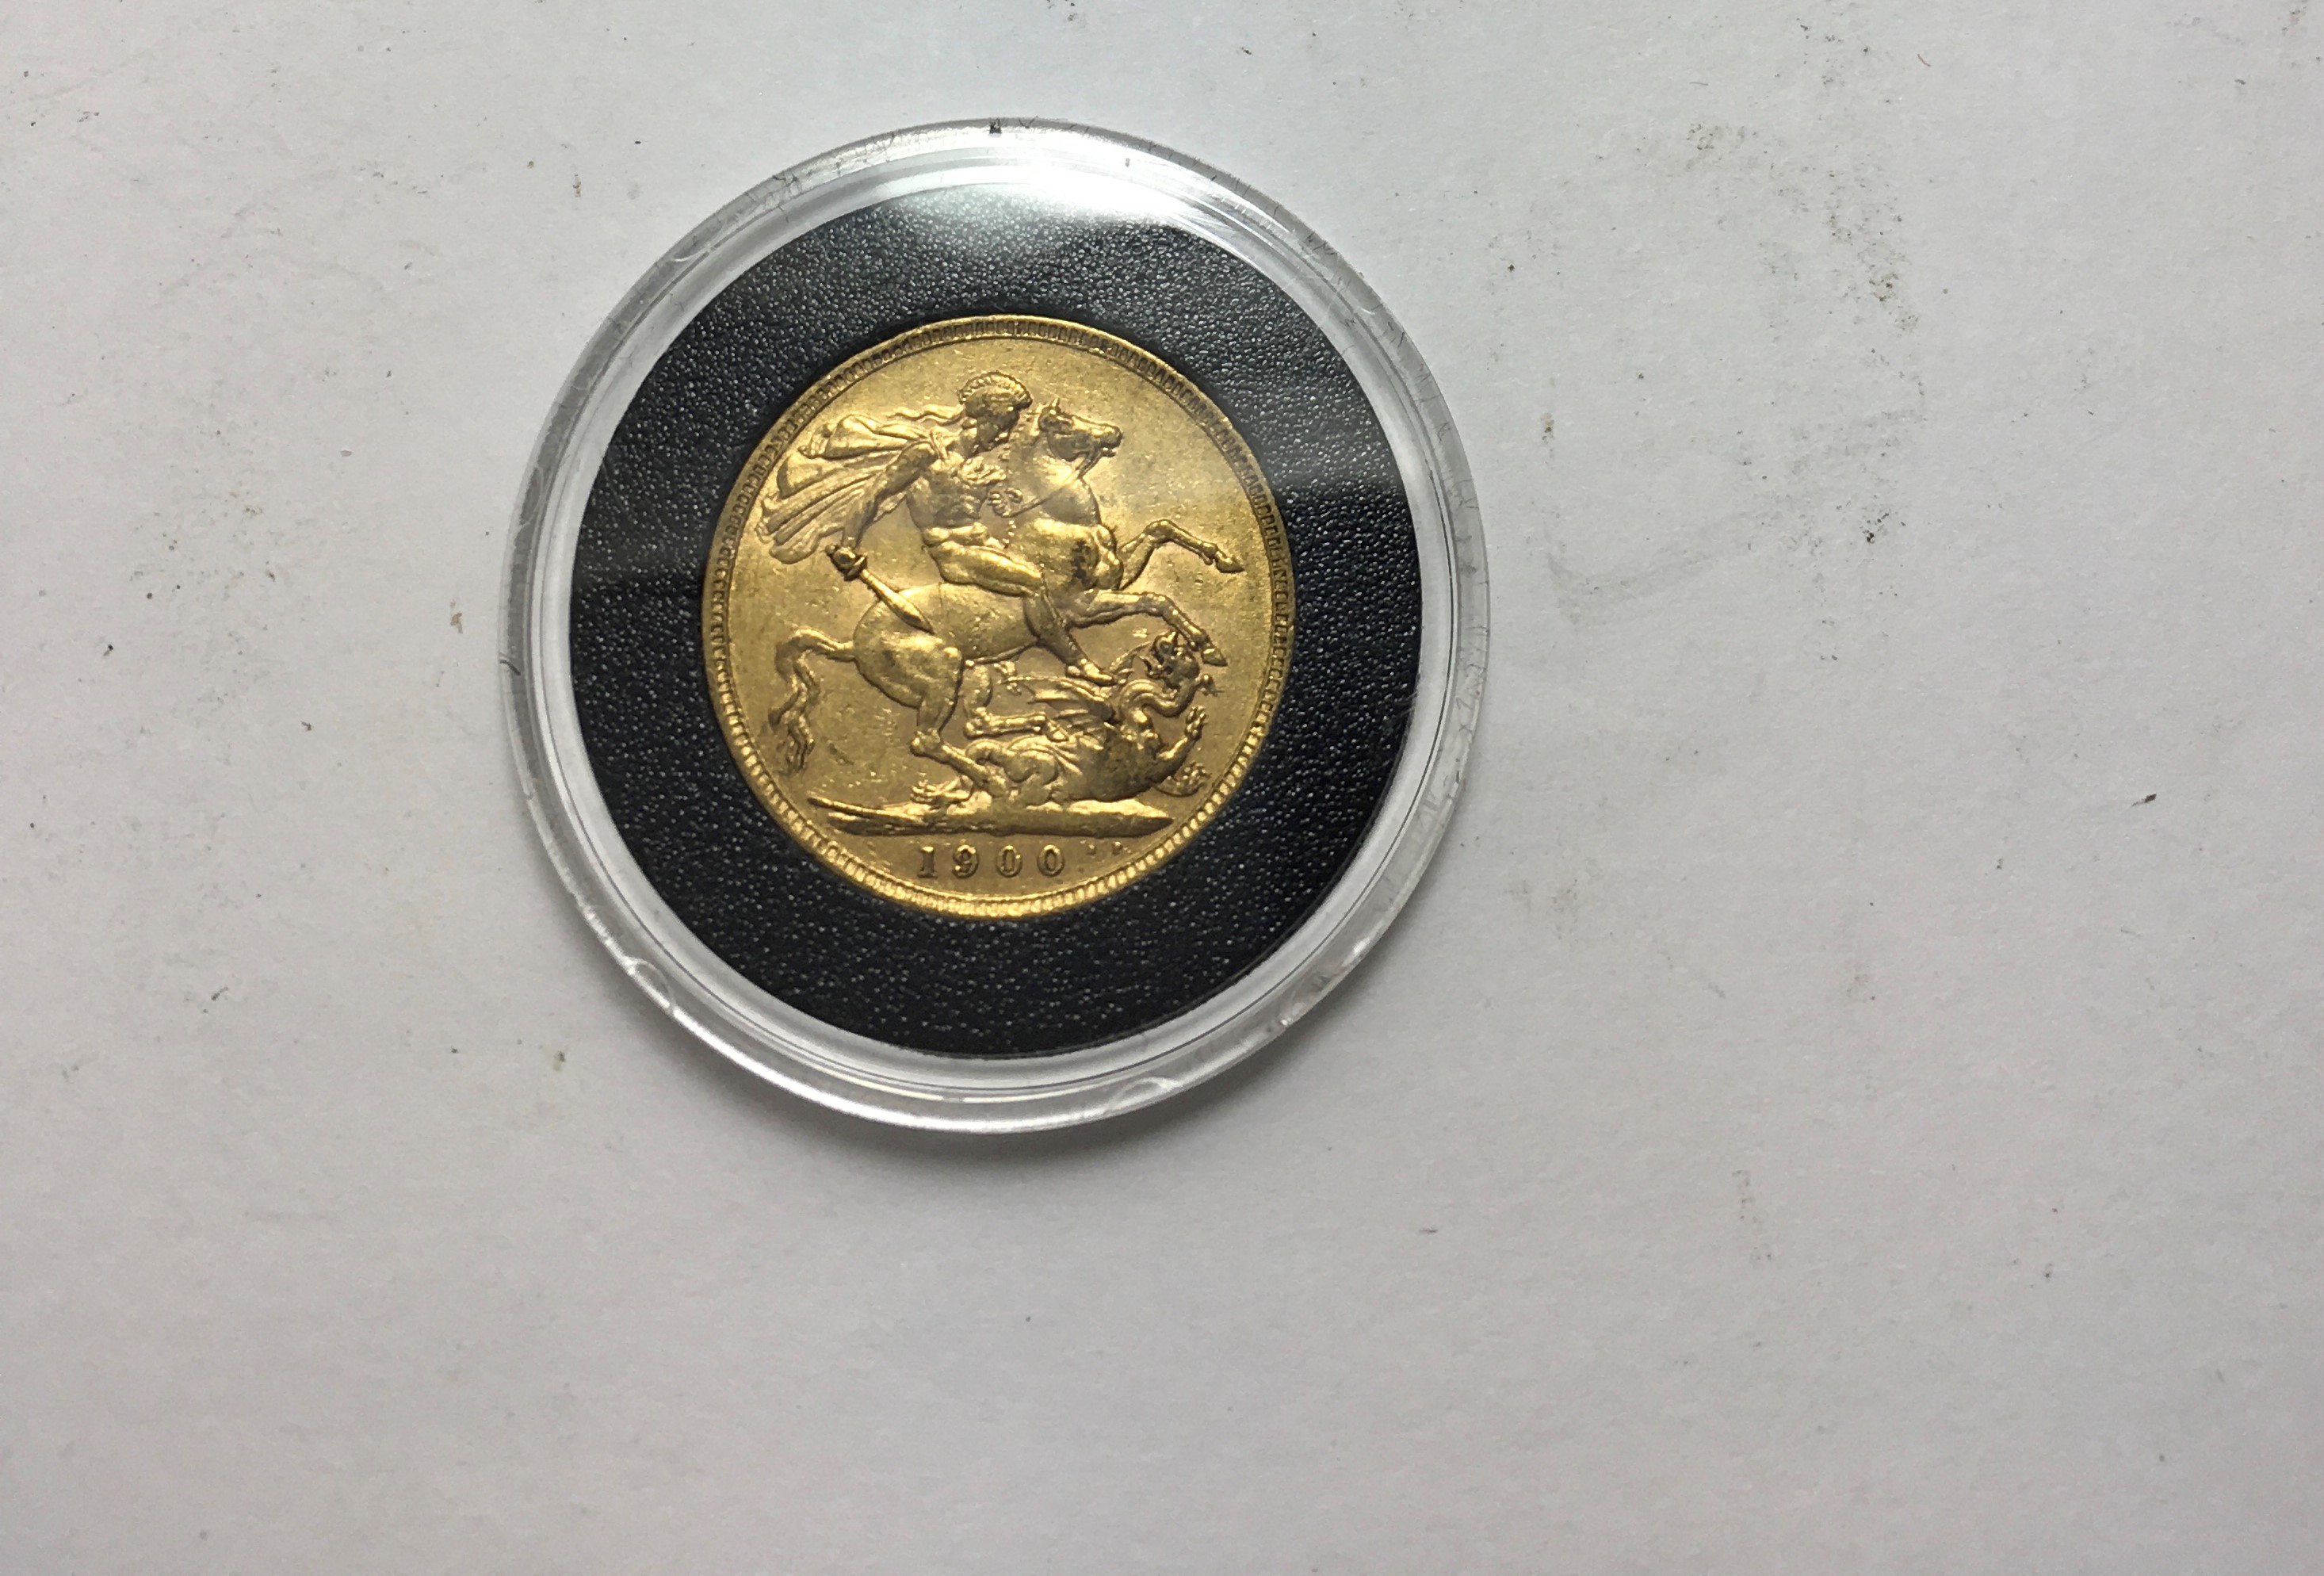 Late Victorian full gold sovereign 1900, the Queen in Full Veil, collectors casual, - Image 3 of 3